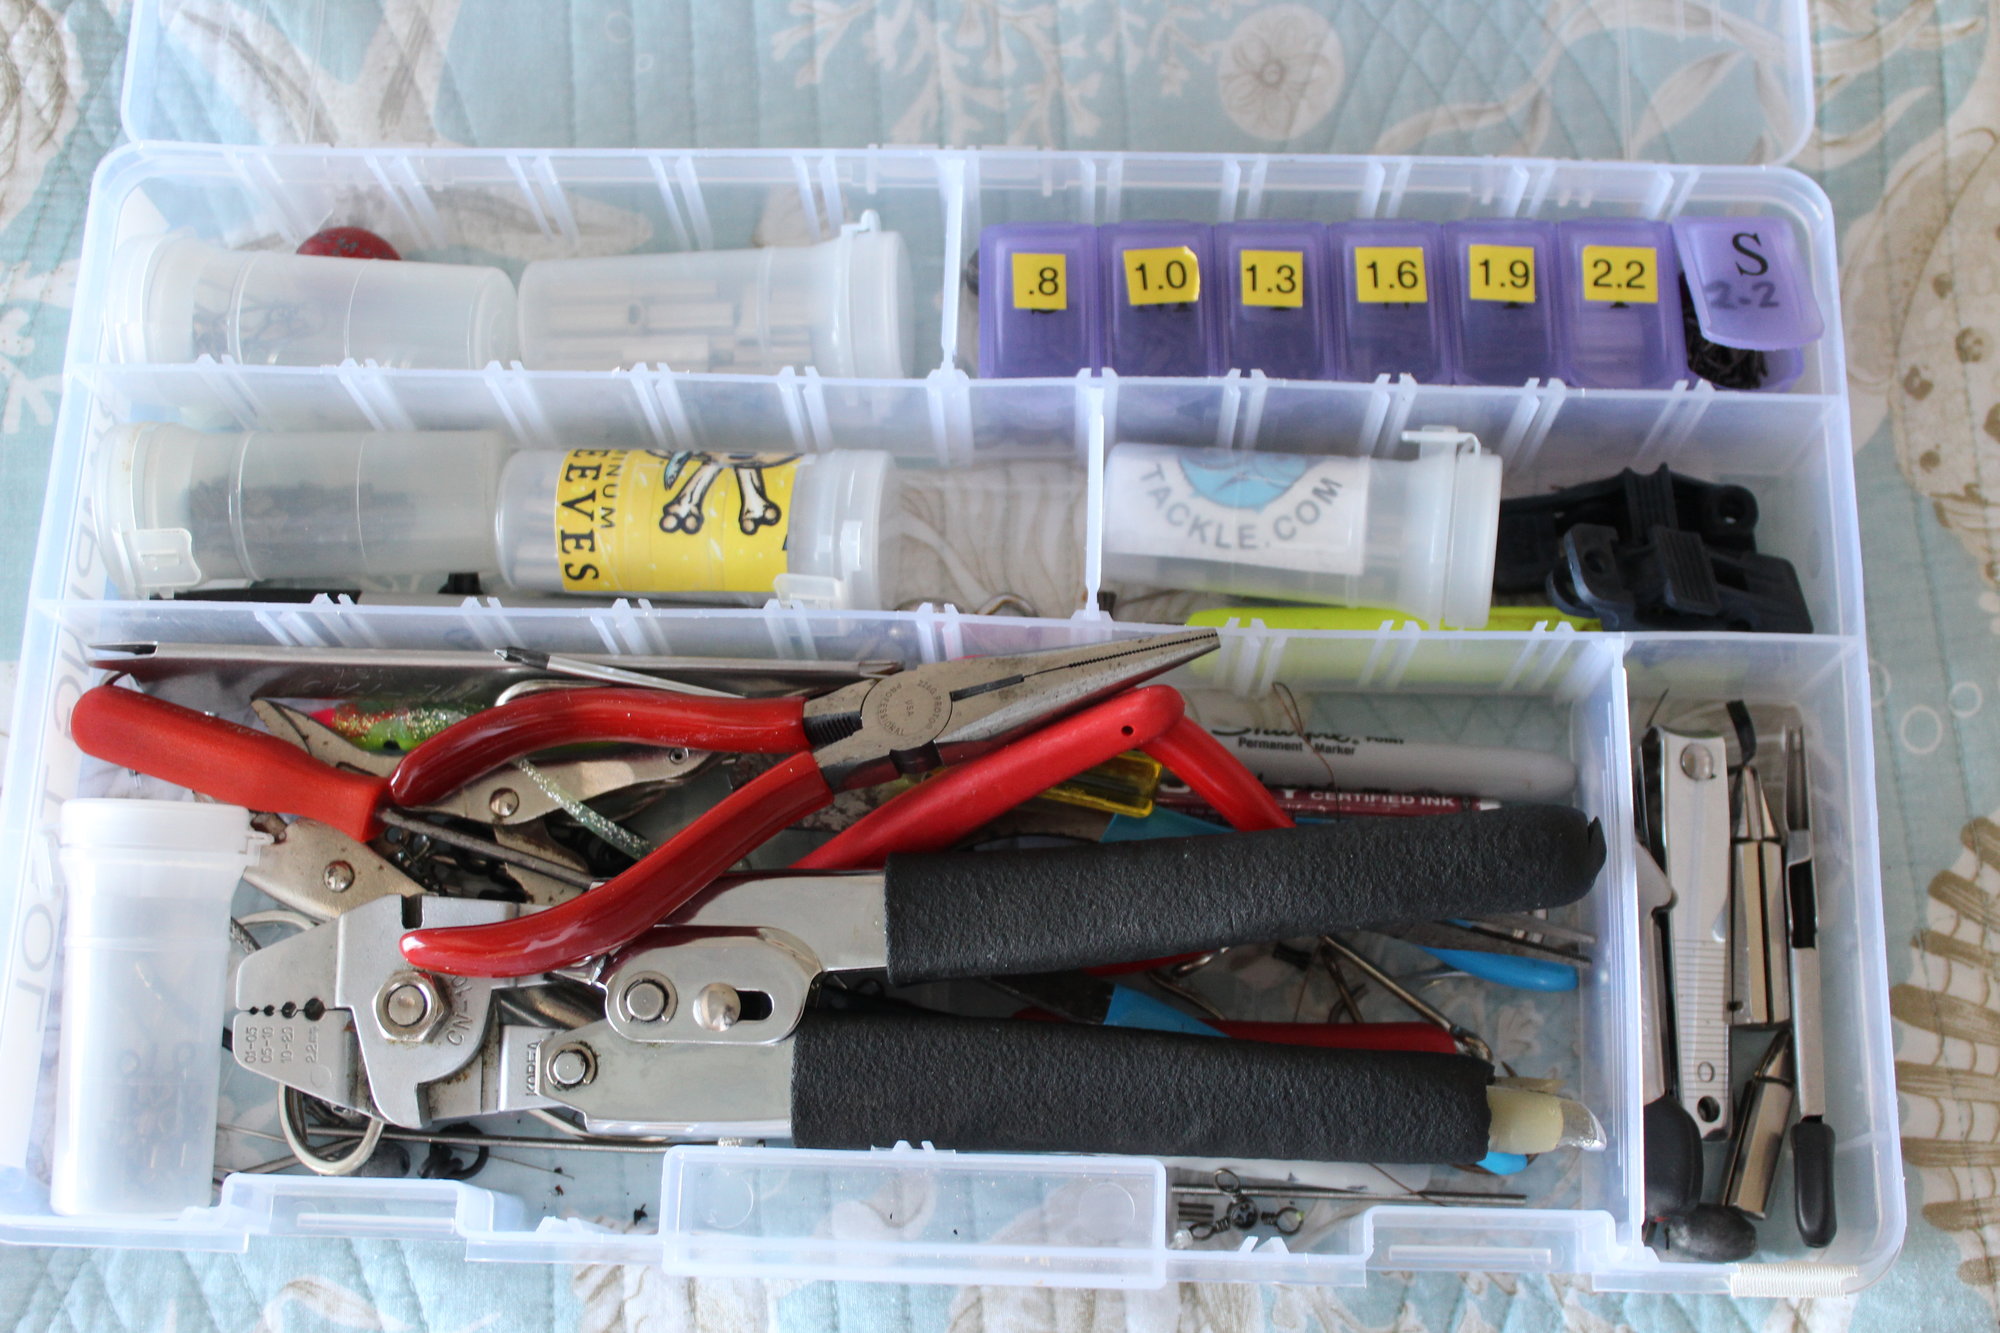 Tuna jigs and jig storage - The Hull Truth - Boating and Fishing Forum